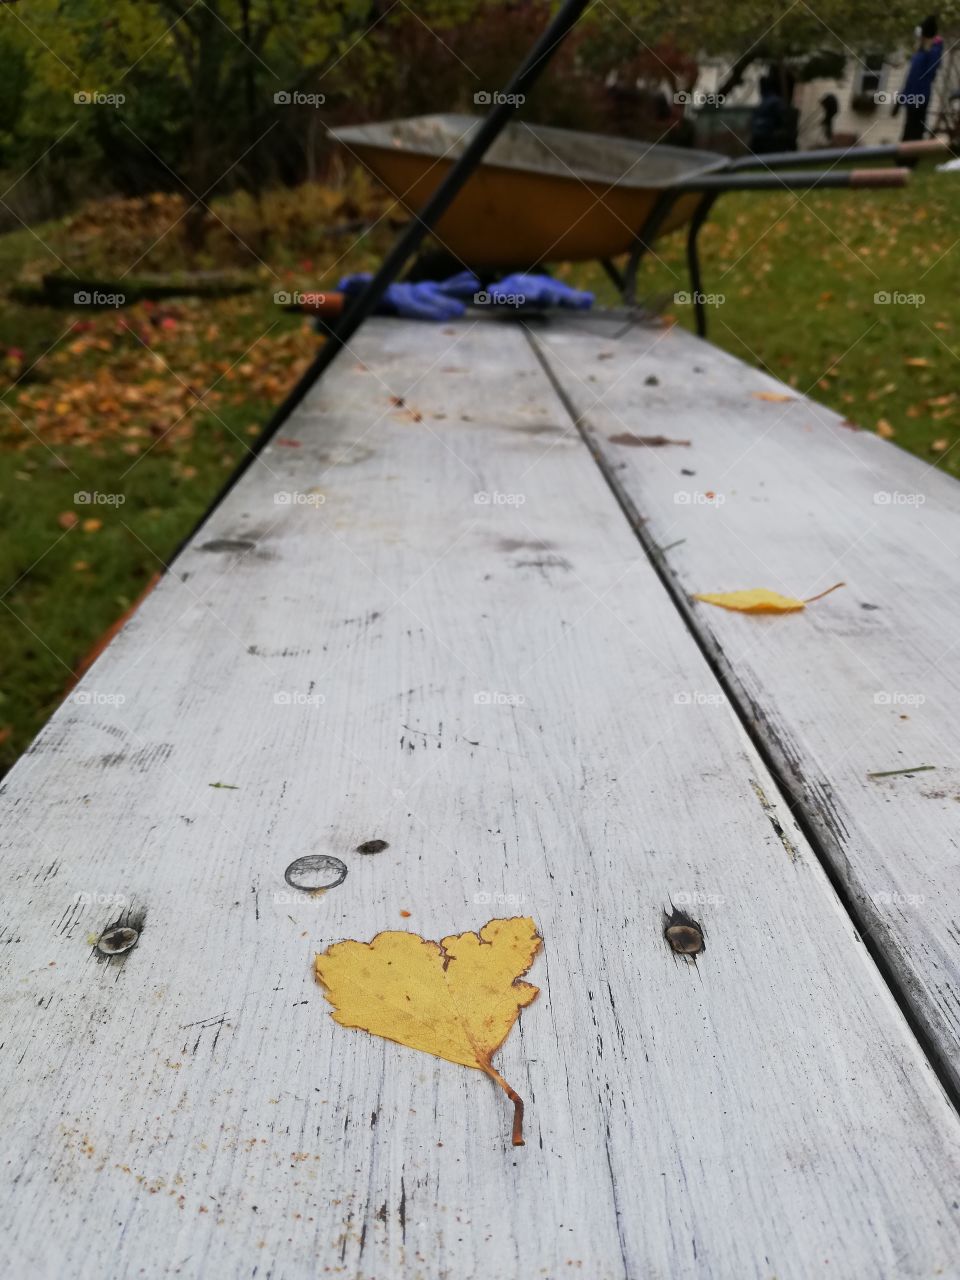 A yellow fallen leaf of heart shape on a white painted bench in the garden. On the other side of the seat the blue gloves, a rake leaning and a wheelbarrow. In the background a person and apple trees.